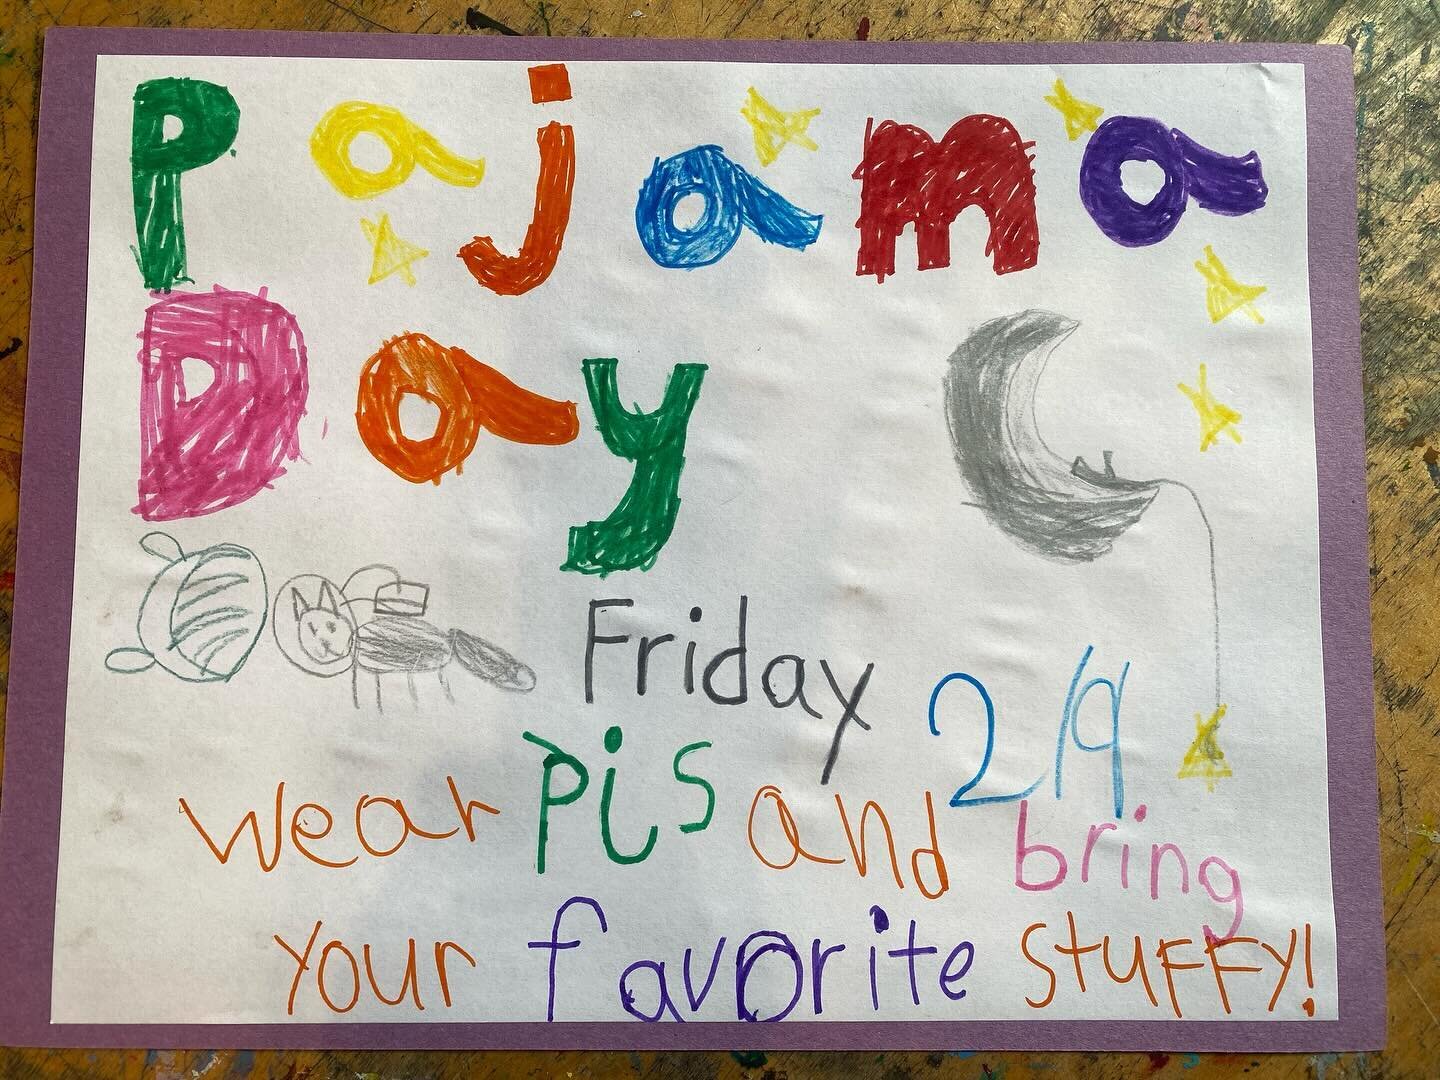 Spirit day on Friday: PAJAMA DAY! Who&rsquo;s getting cozy with us?! #orchardschoolaptos #spiritday